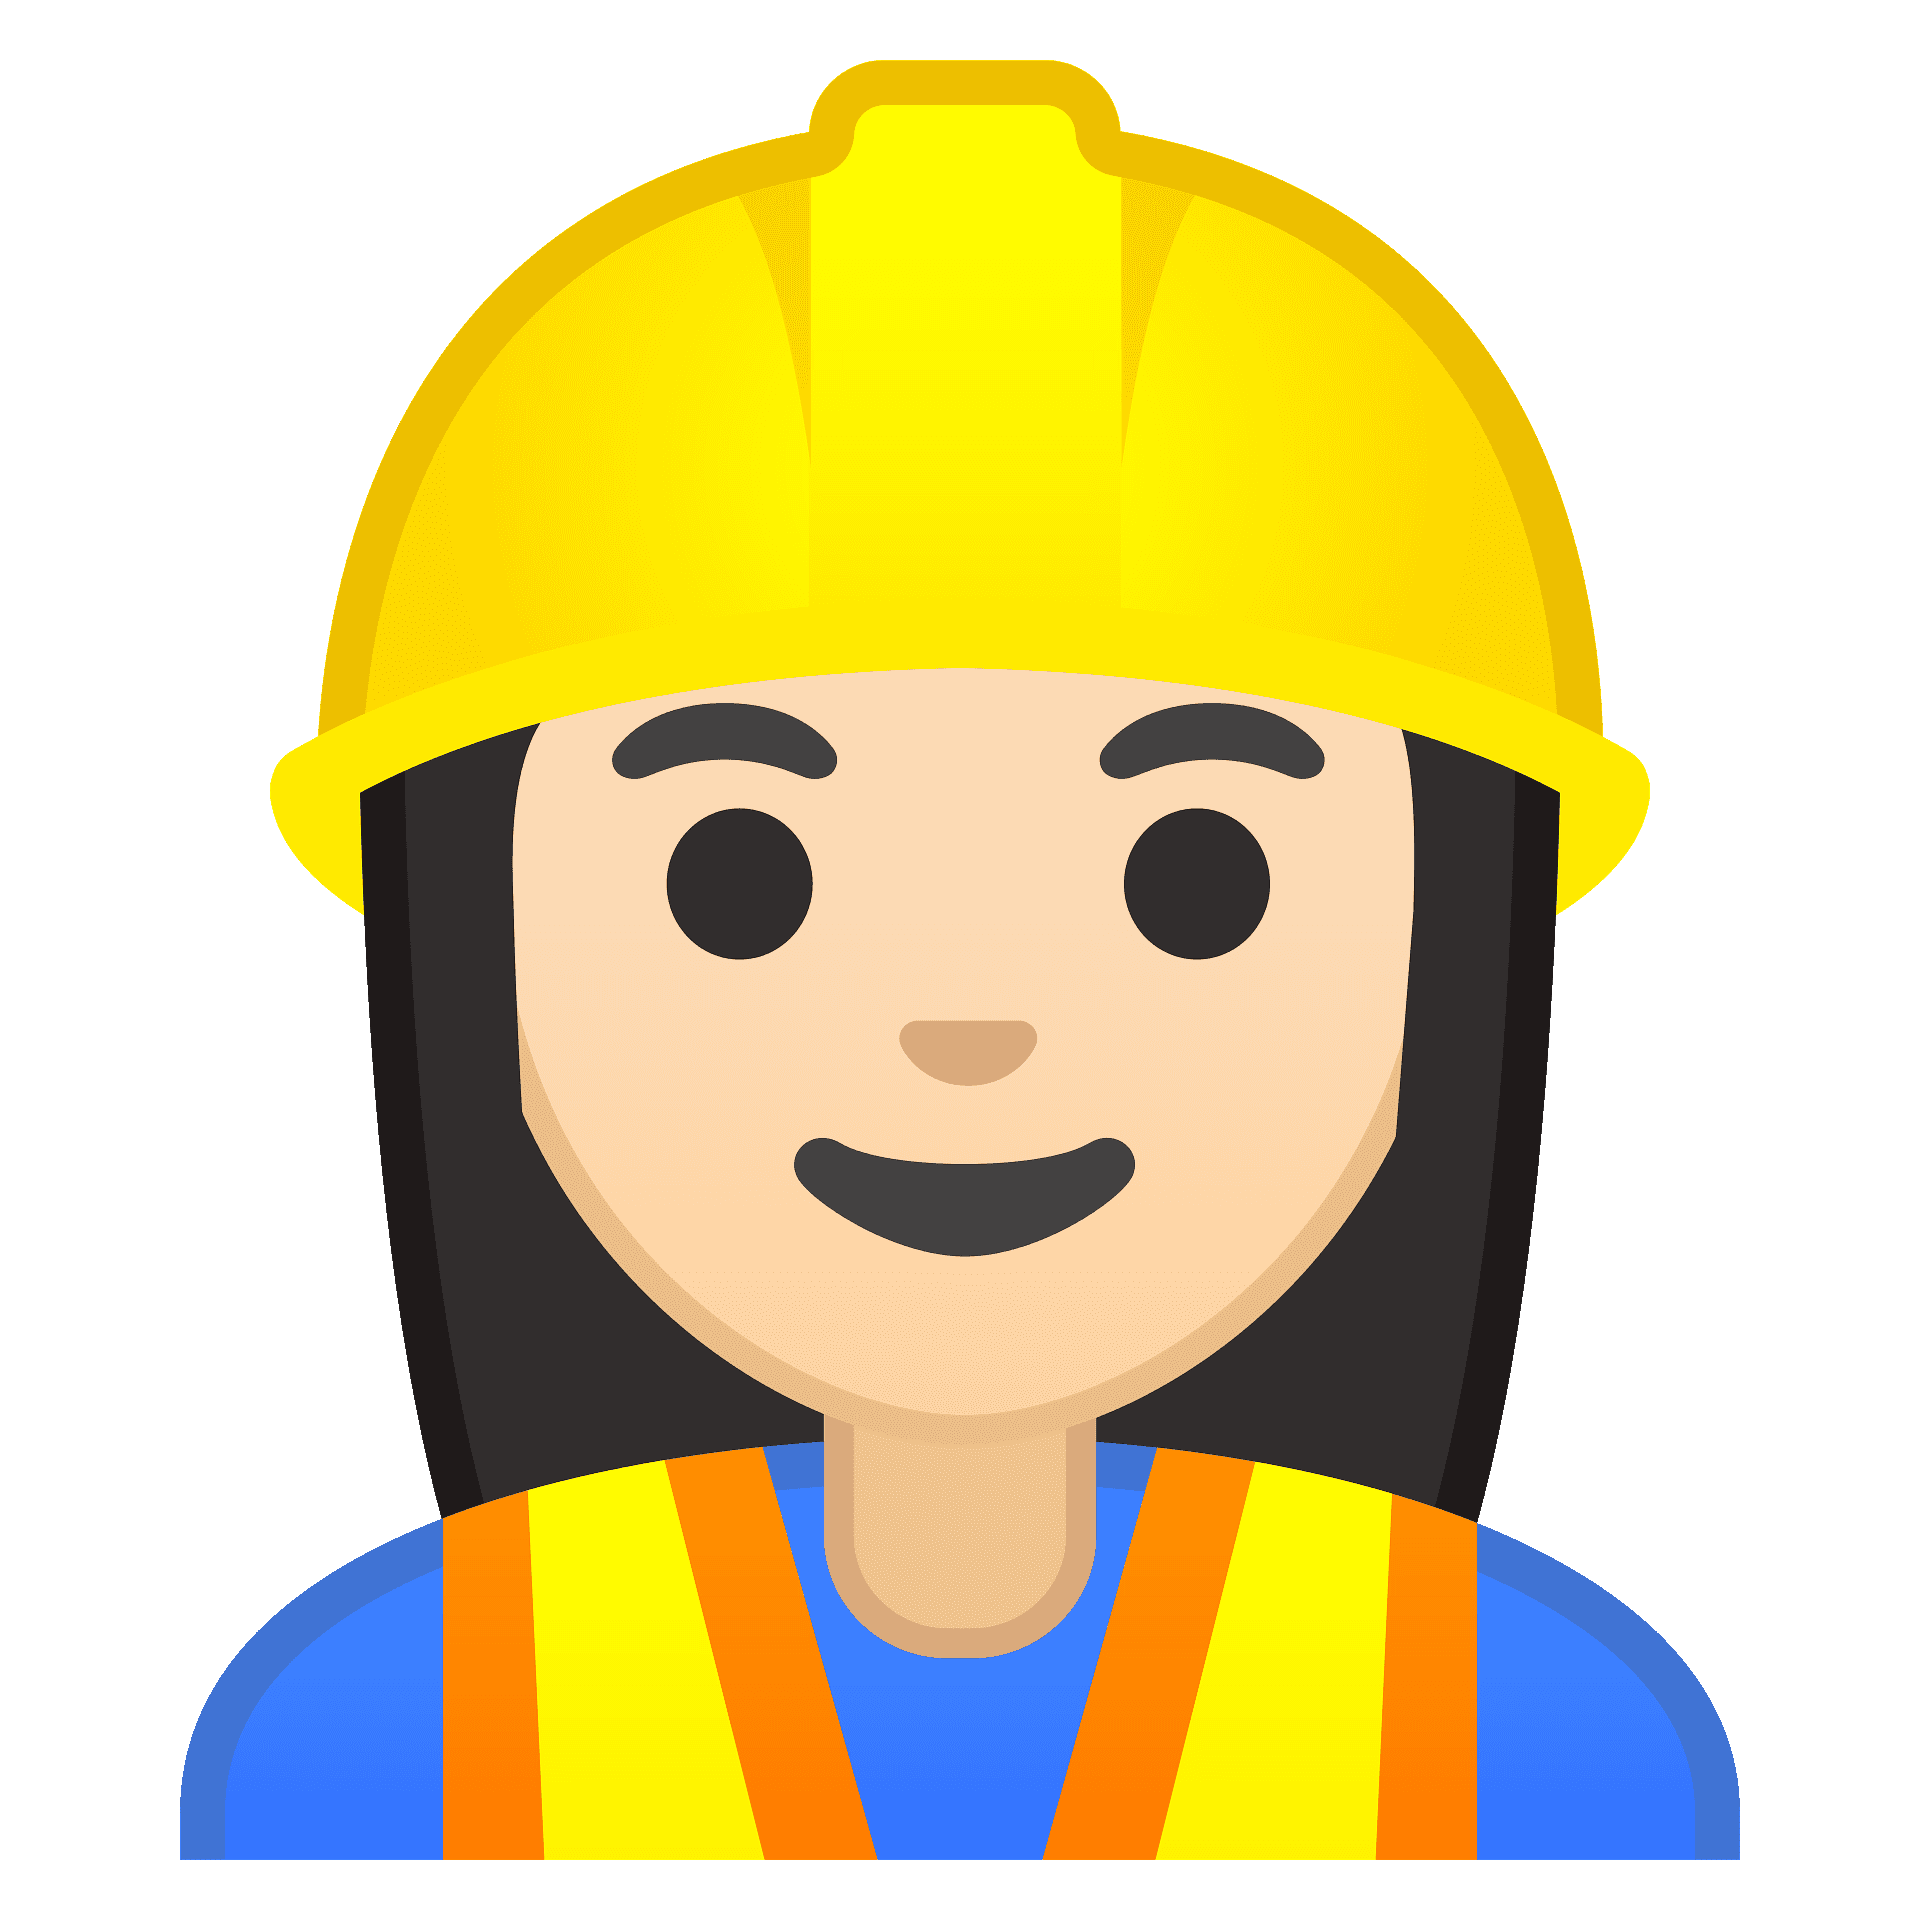 Construction Worker PNG Images HD